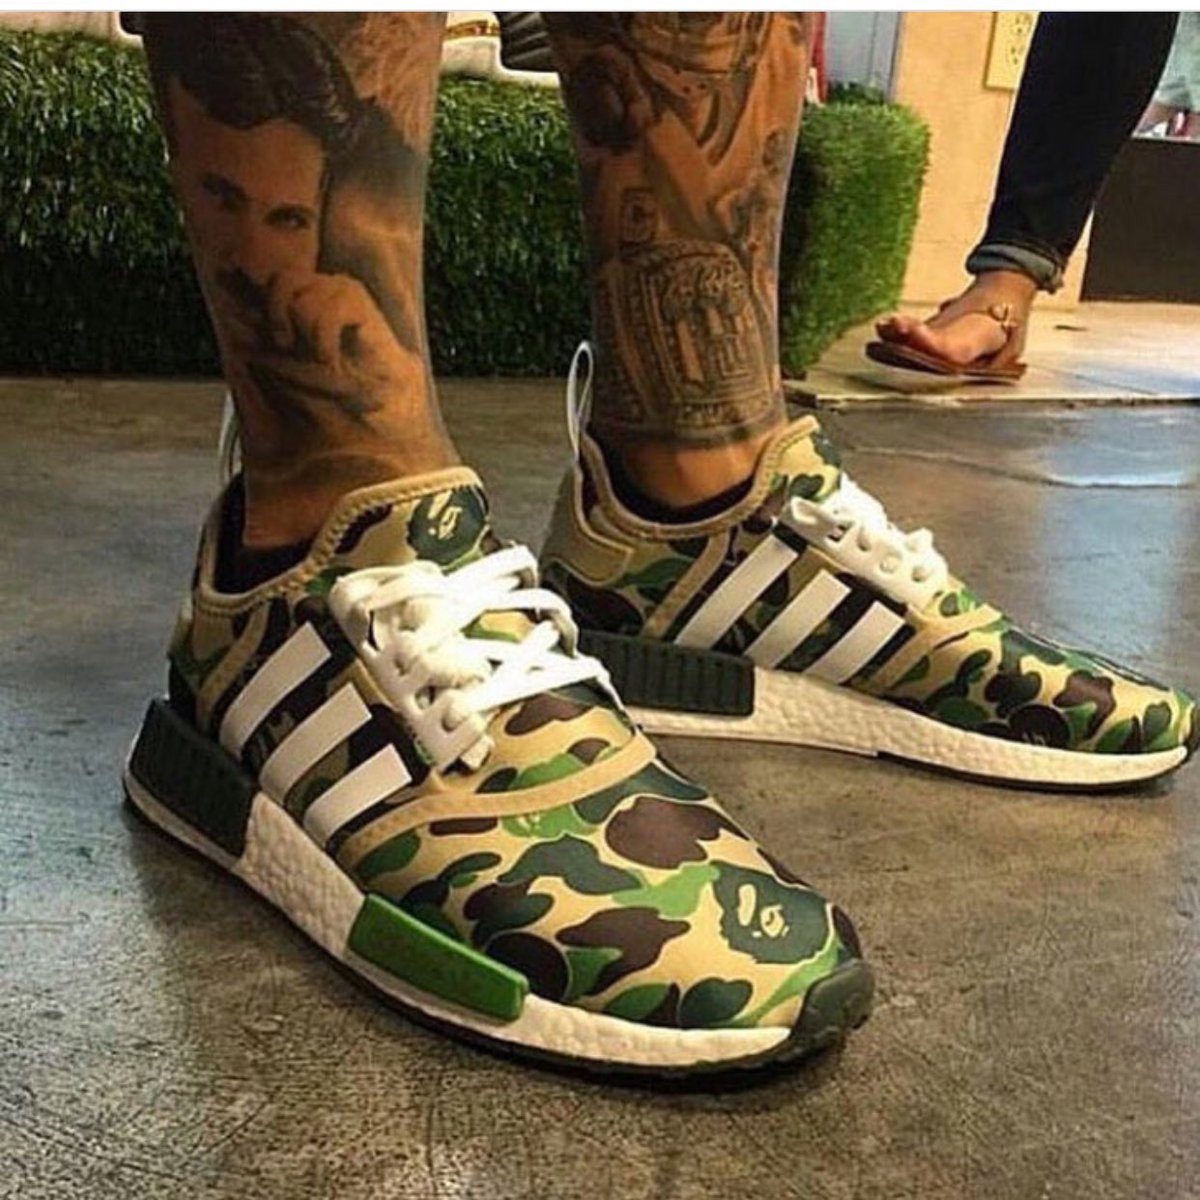 Sneakers Hunter on X: "Adidas x BAPE NMD Boost on foot. November 26 release.Cop here : https://t.co/lNS5SFlB7S -- Use "10off" code for a special 10% discount! :) https://t.co/QzX9slUhNU" X